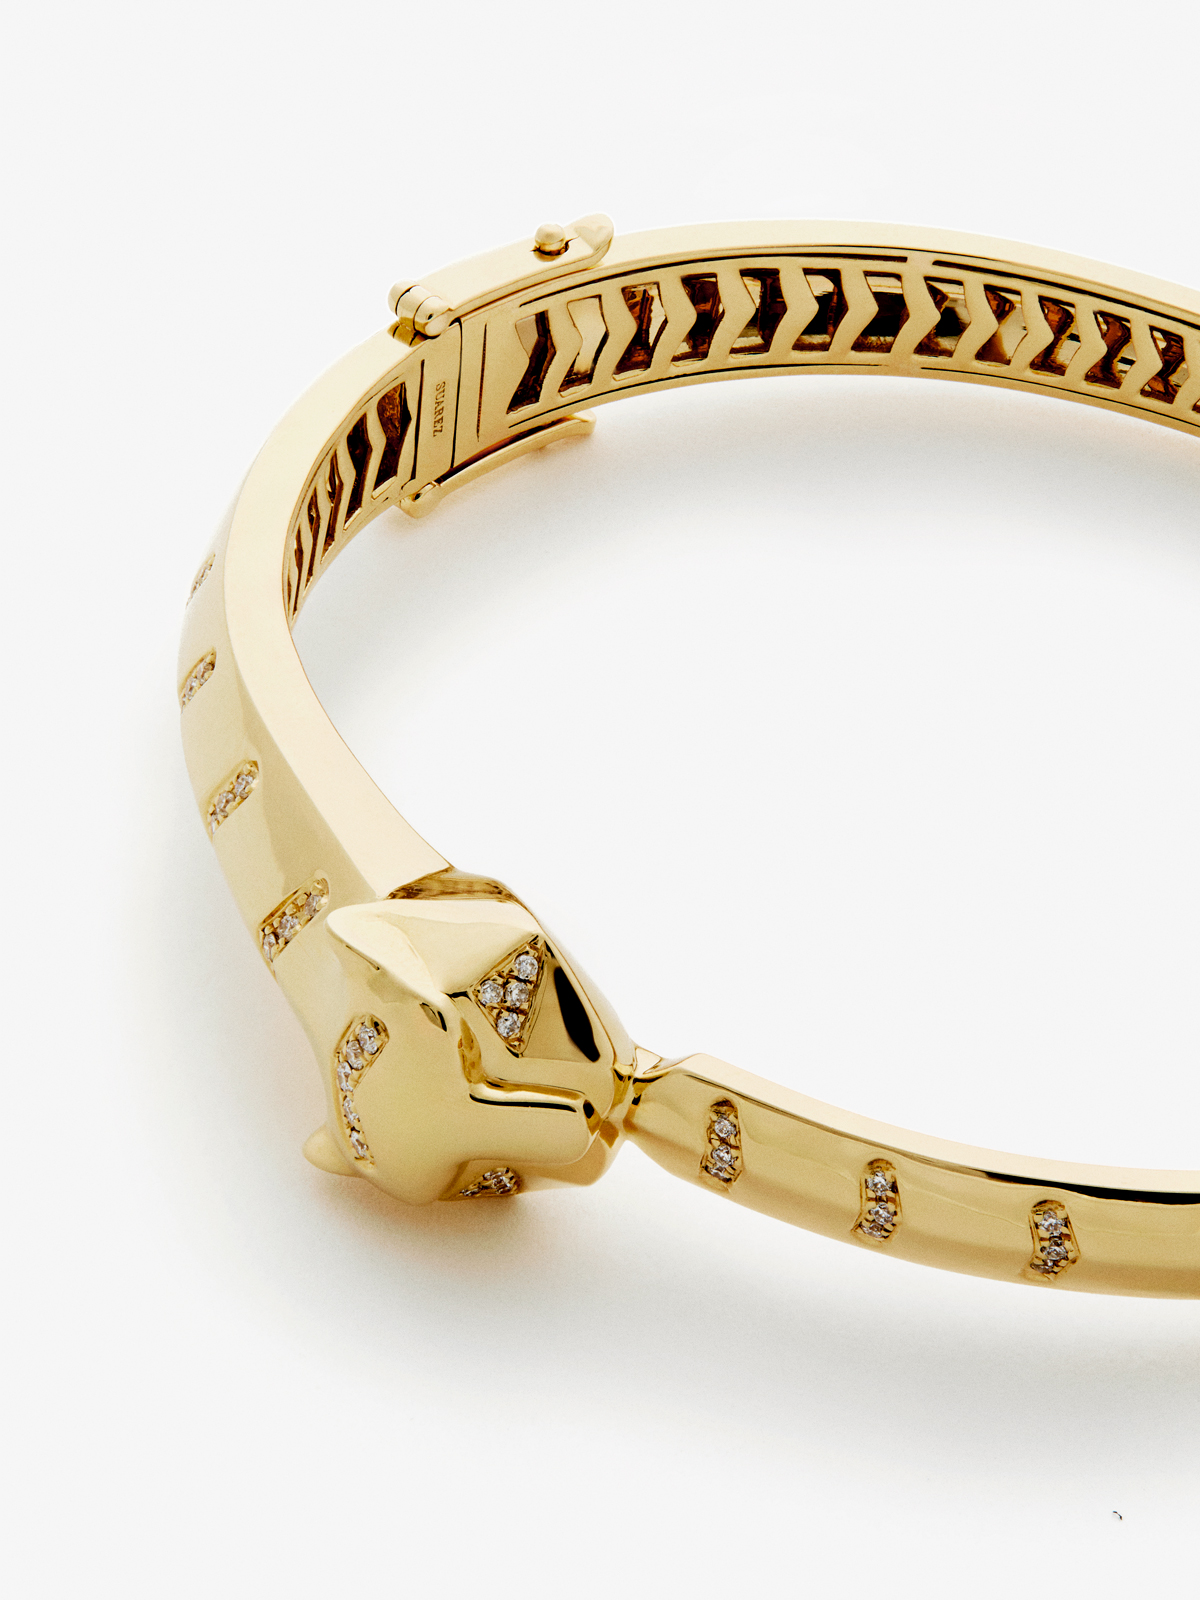 Rigid 18K yellow gold bracelet with 0.23 ct brilliant cut diamonds in the shape of a tiger